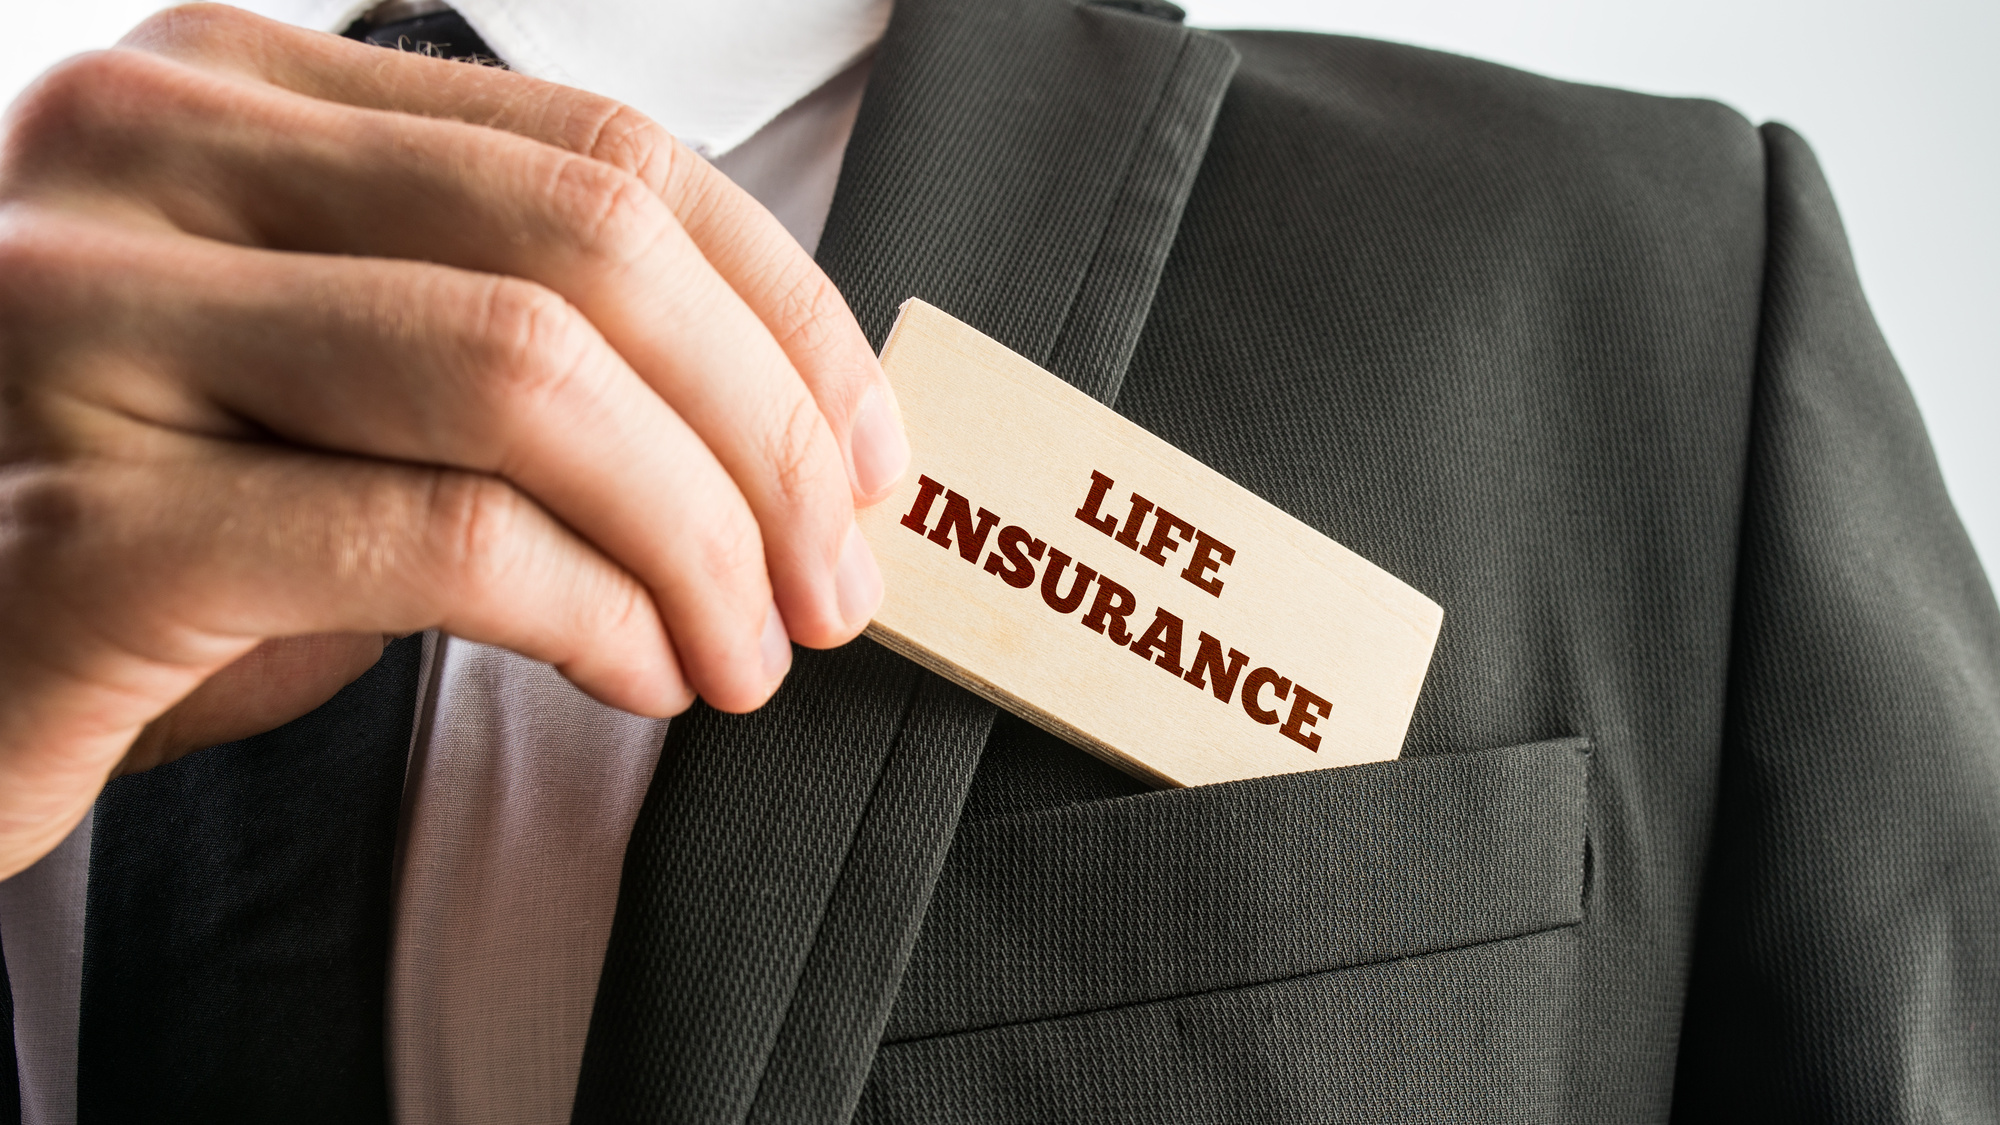 A New Agent’s Guide to Selling Life Insurance Policies